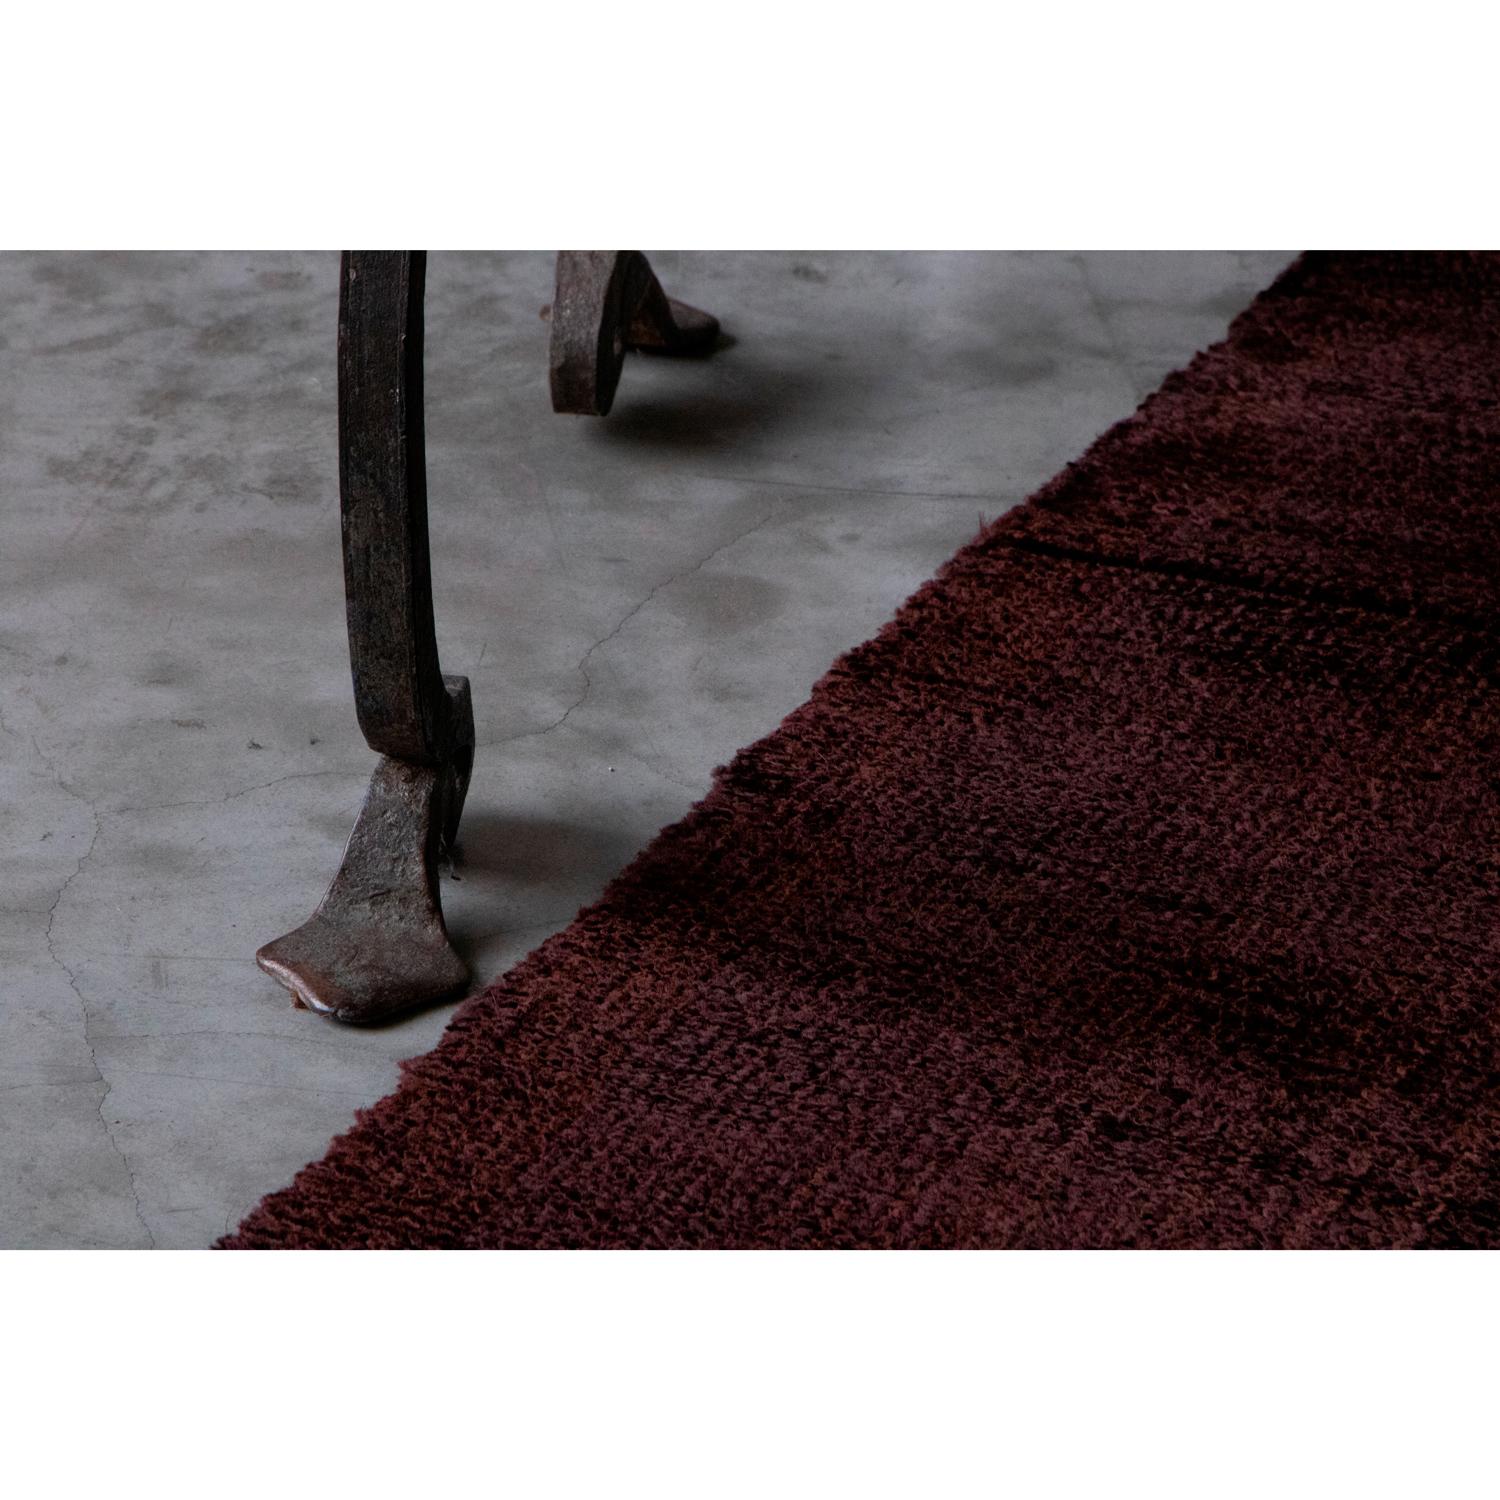 Hand-Woven 21st Cent Shiny Sky Blue Brown Runner Rug by Deanna Comellini in Stock 70x240 cm For Sale